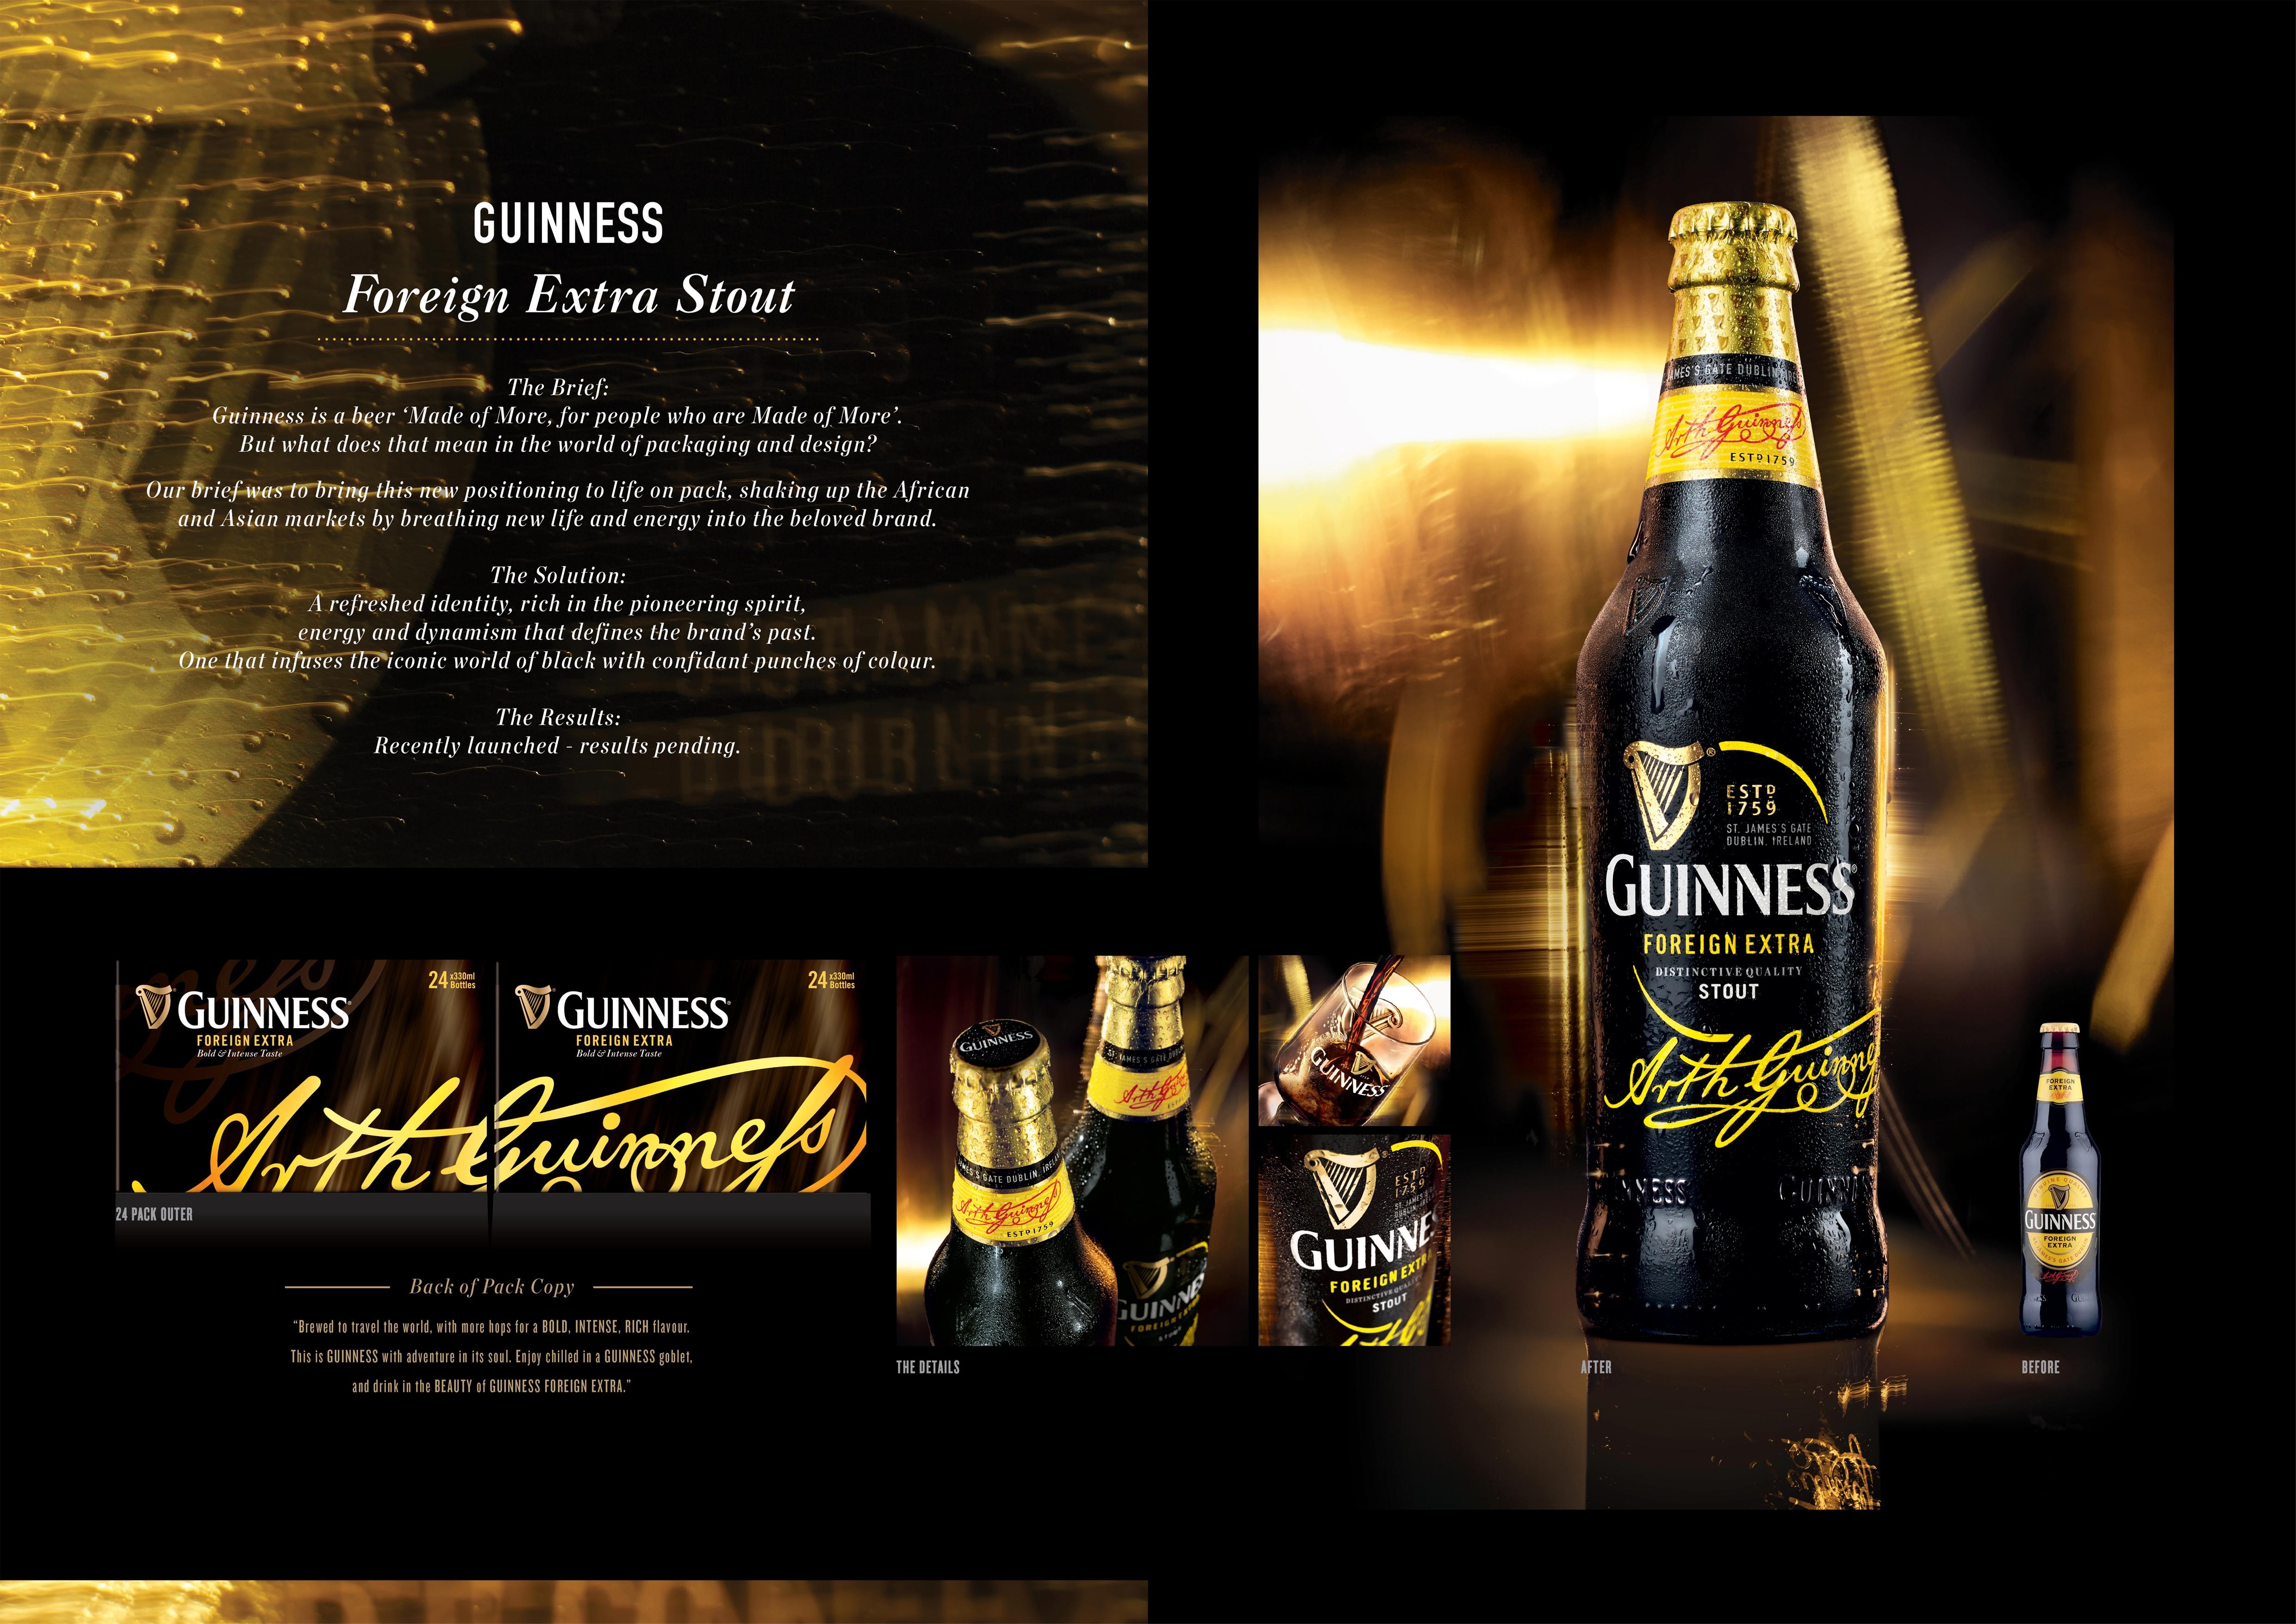 GUINNESS FOREIGN EXTRA STOUT